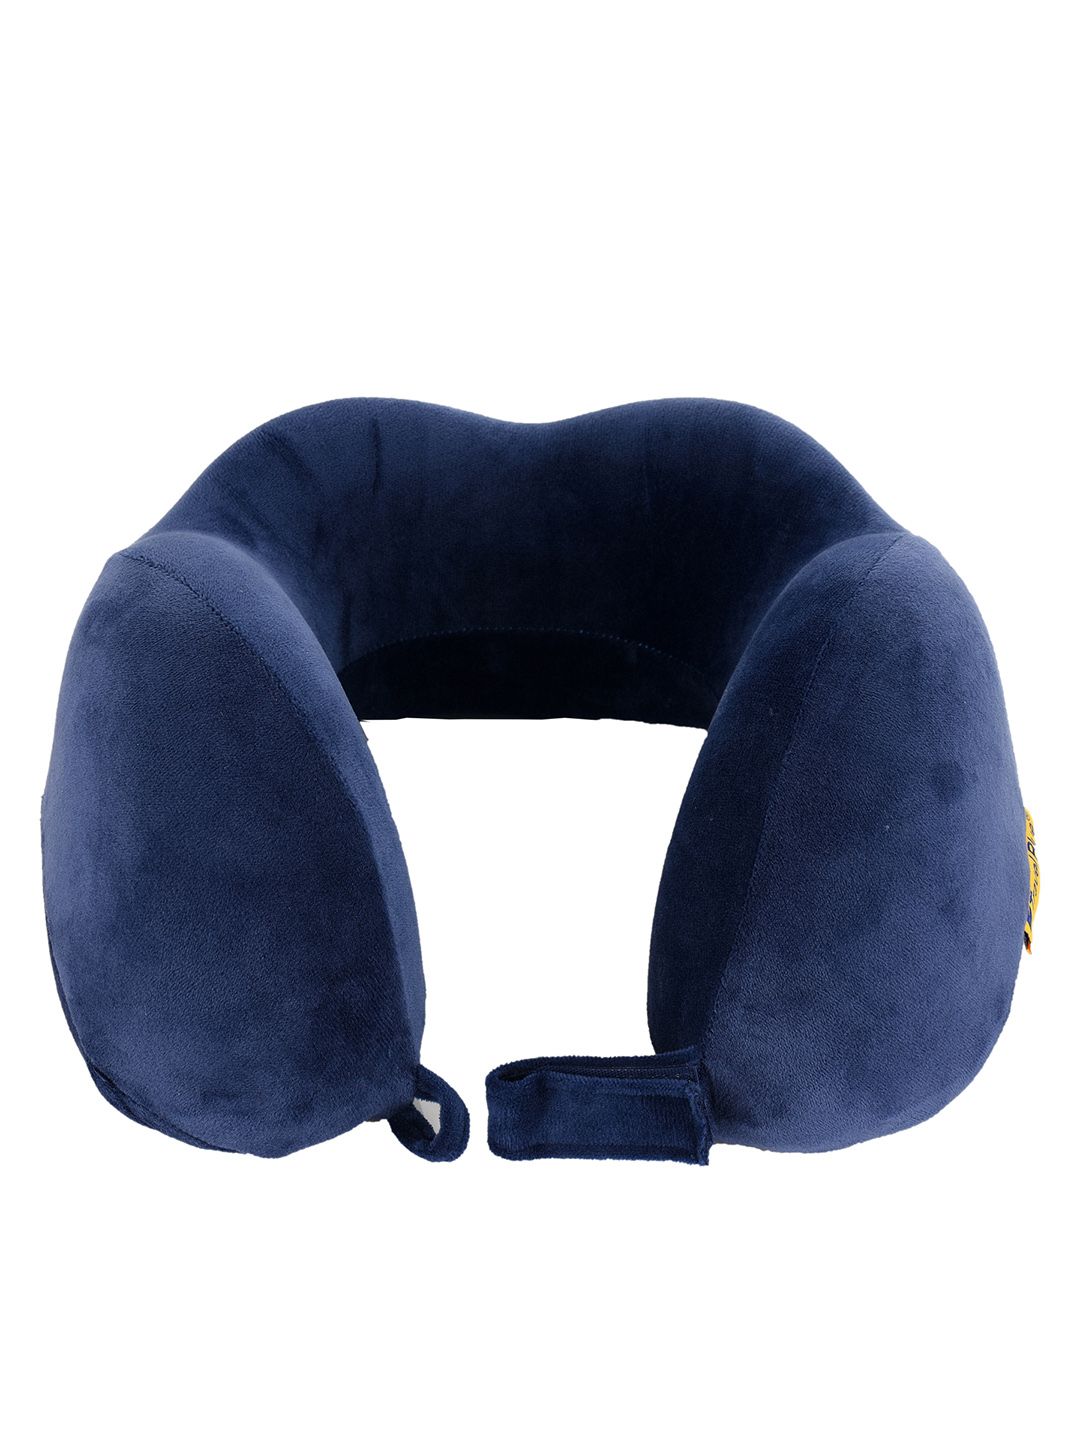 Travel Blue Navy Blue Solid Memory Foam Foldable Tranquility Travel Neck Pillow Price in India